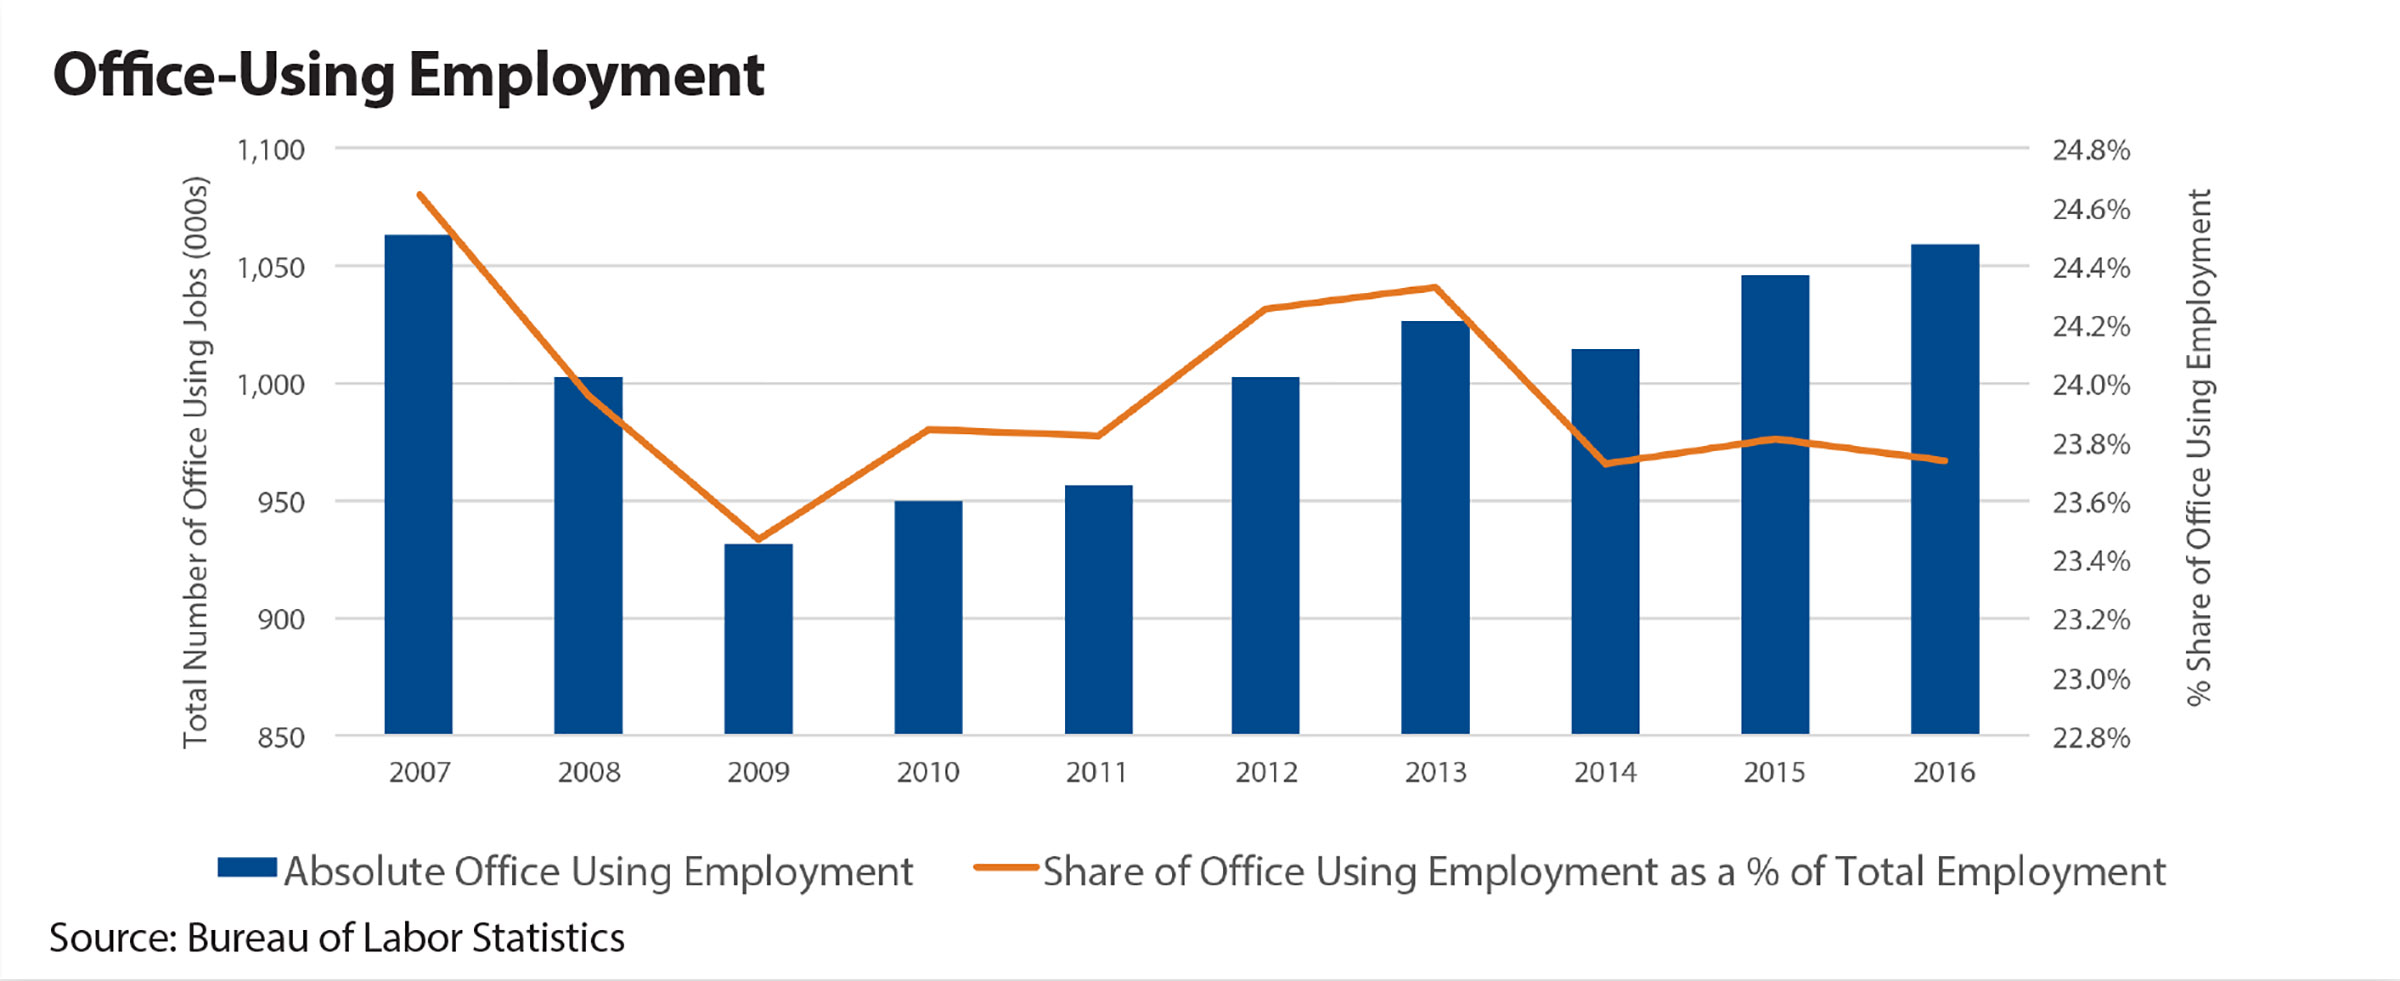 Office-Using Employment